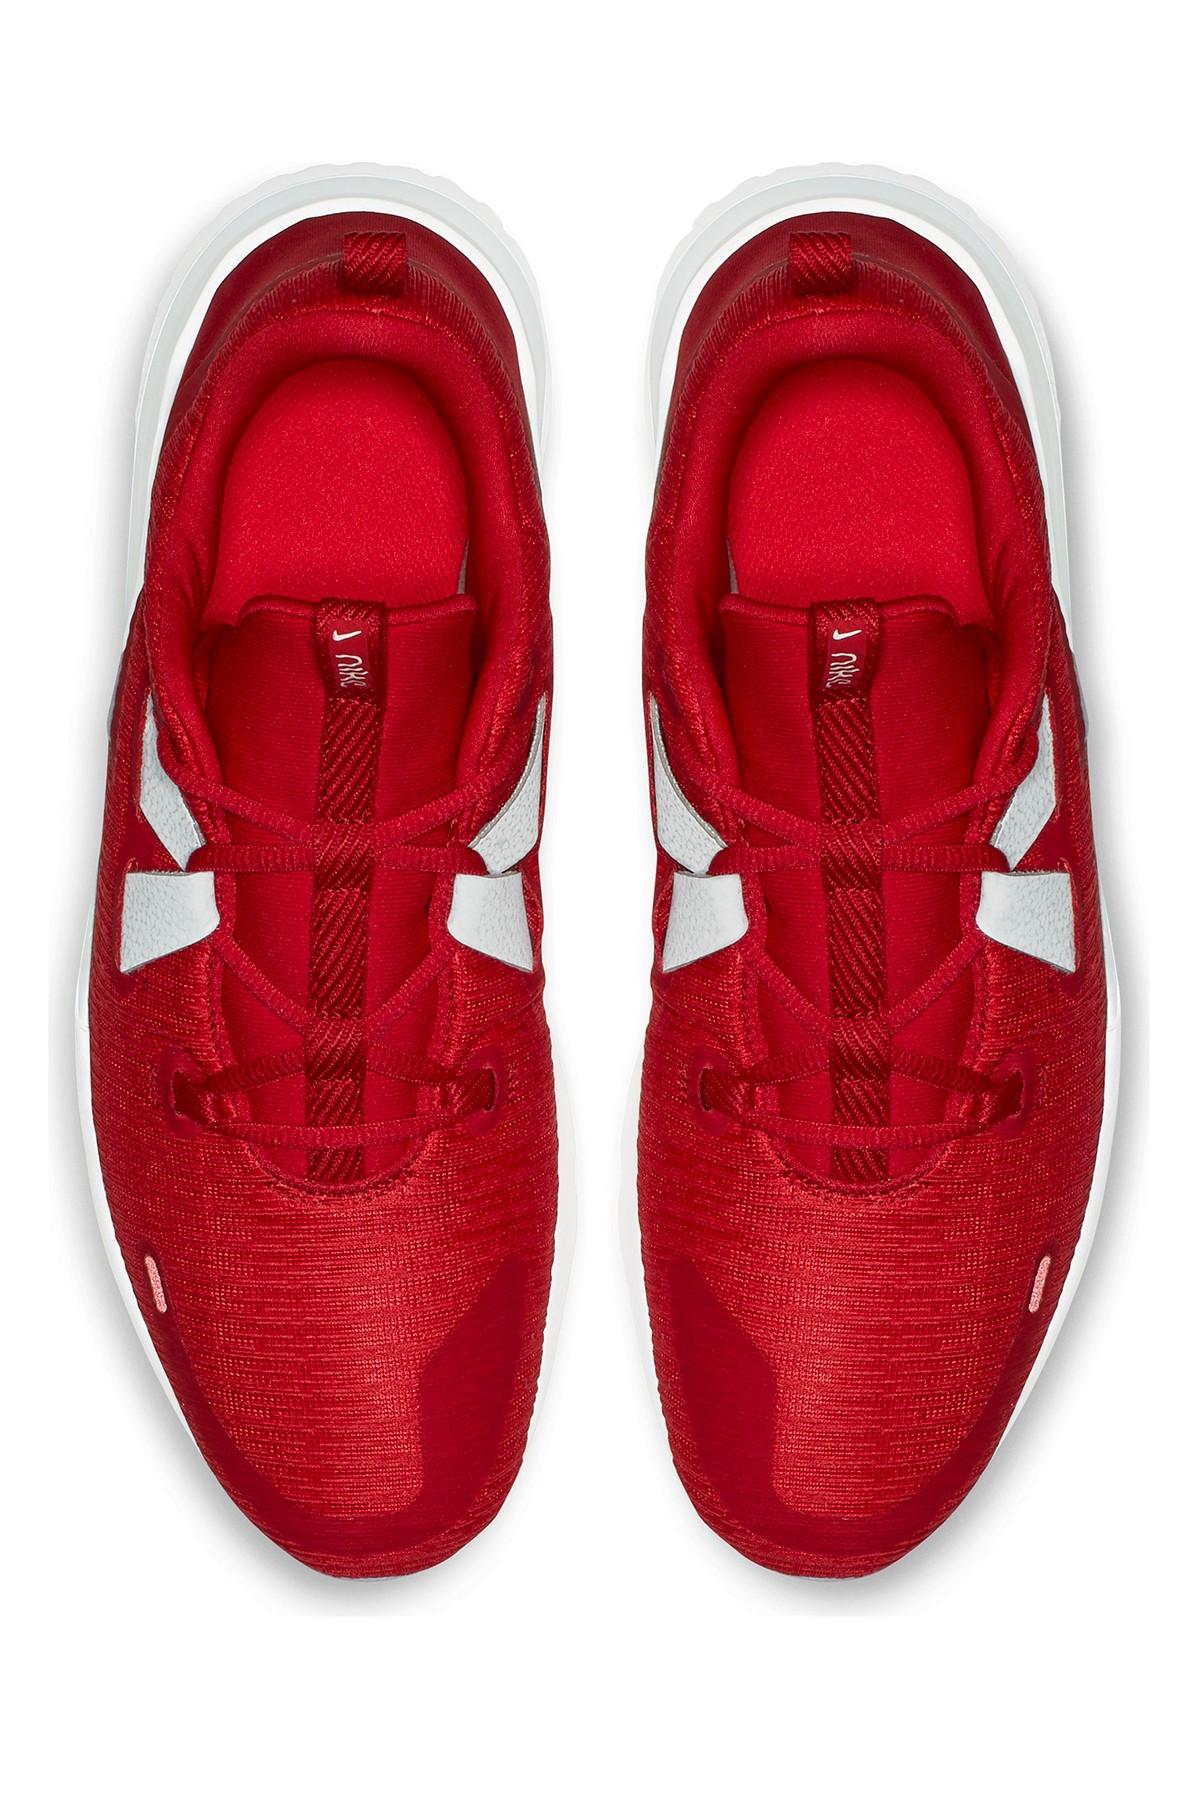 nike renew arena red